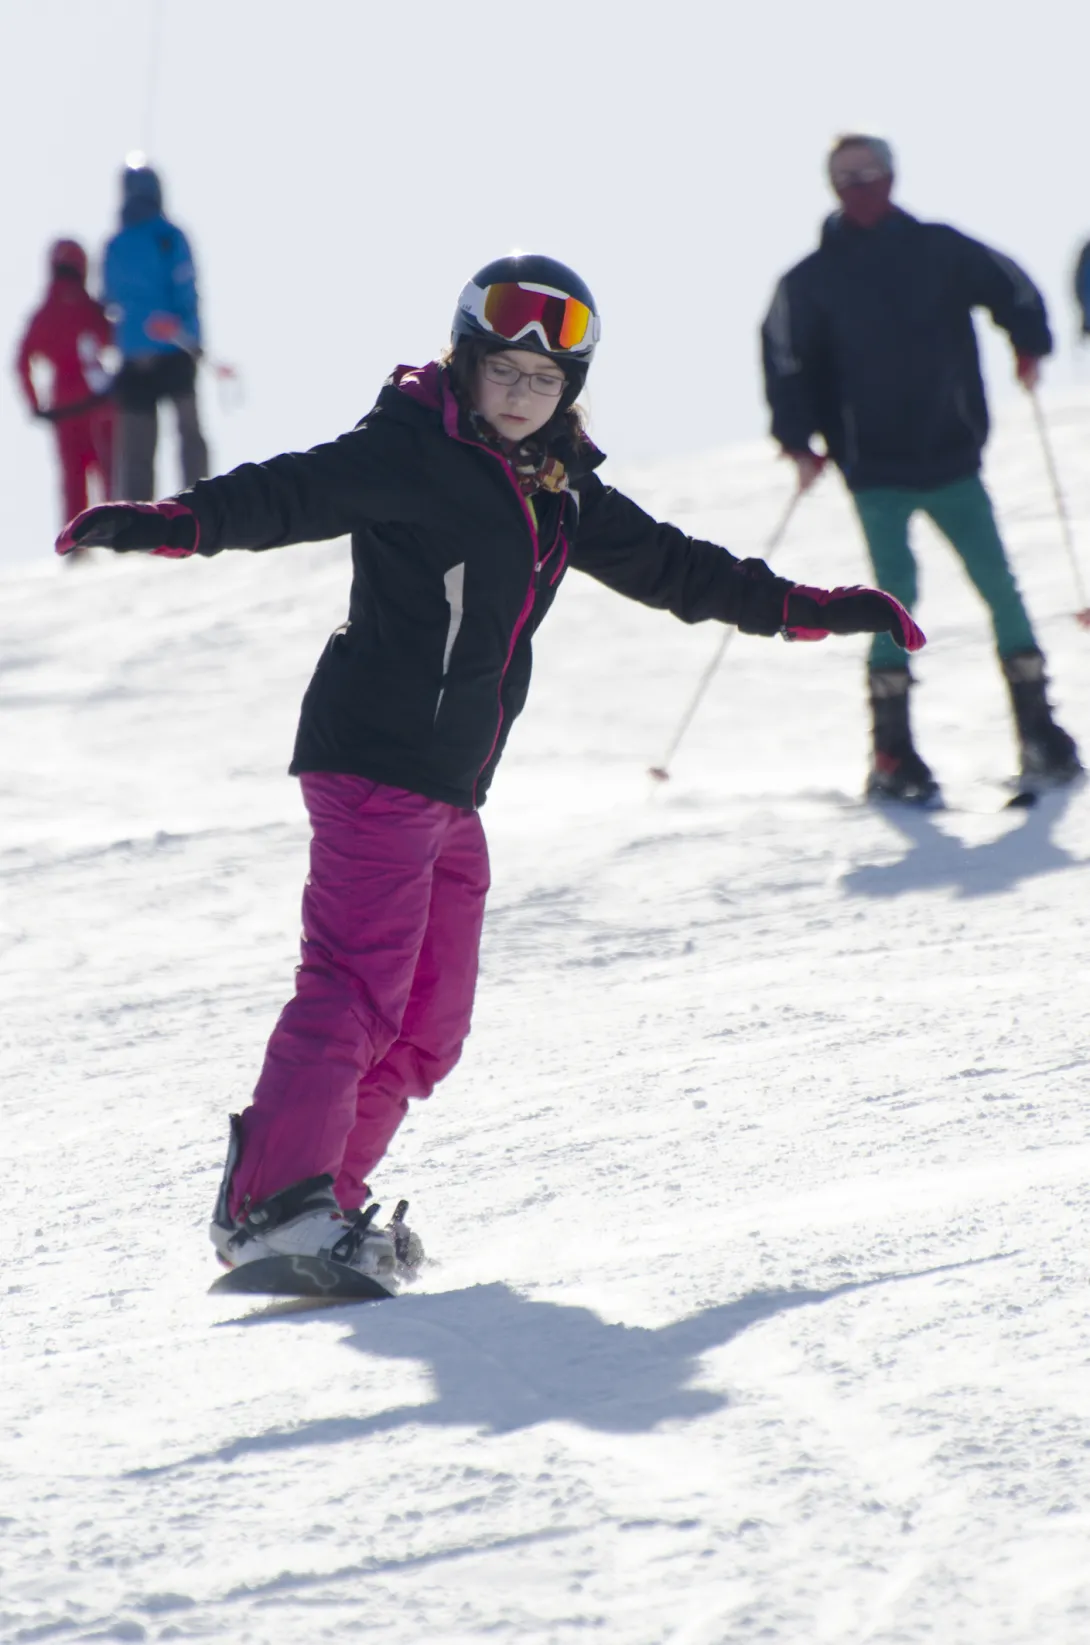 Learning to snowboard